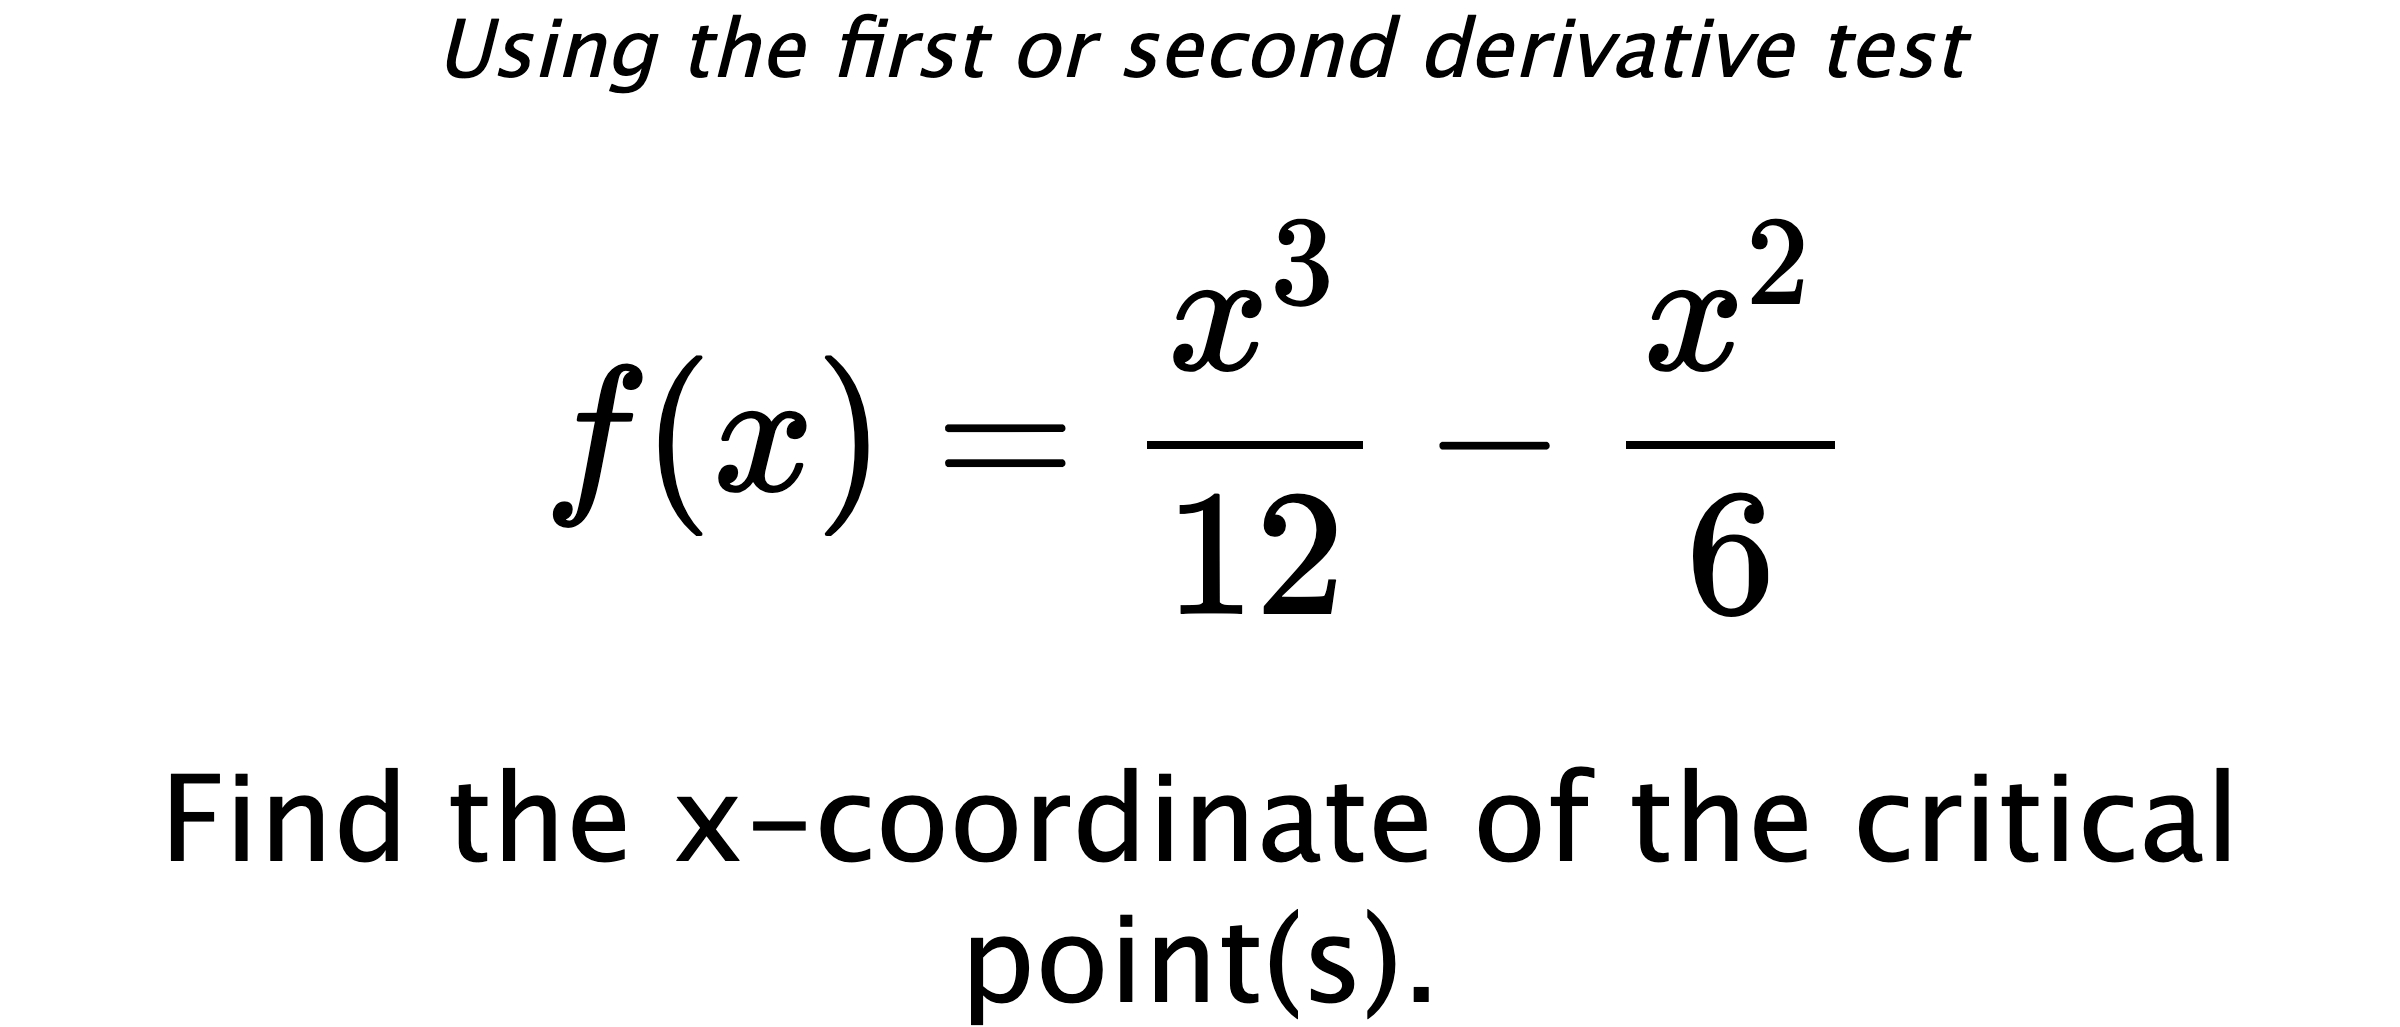 Using the first or second derivative test $$ f(x)=\frac{x^3}{12}-\frac{x^2}{6} $$ Find the x-coordinate of the critical point(s).